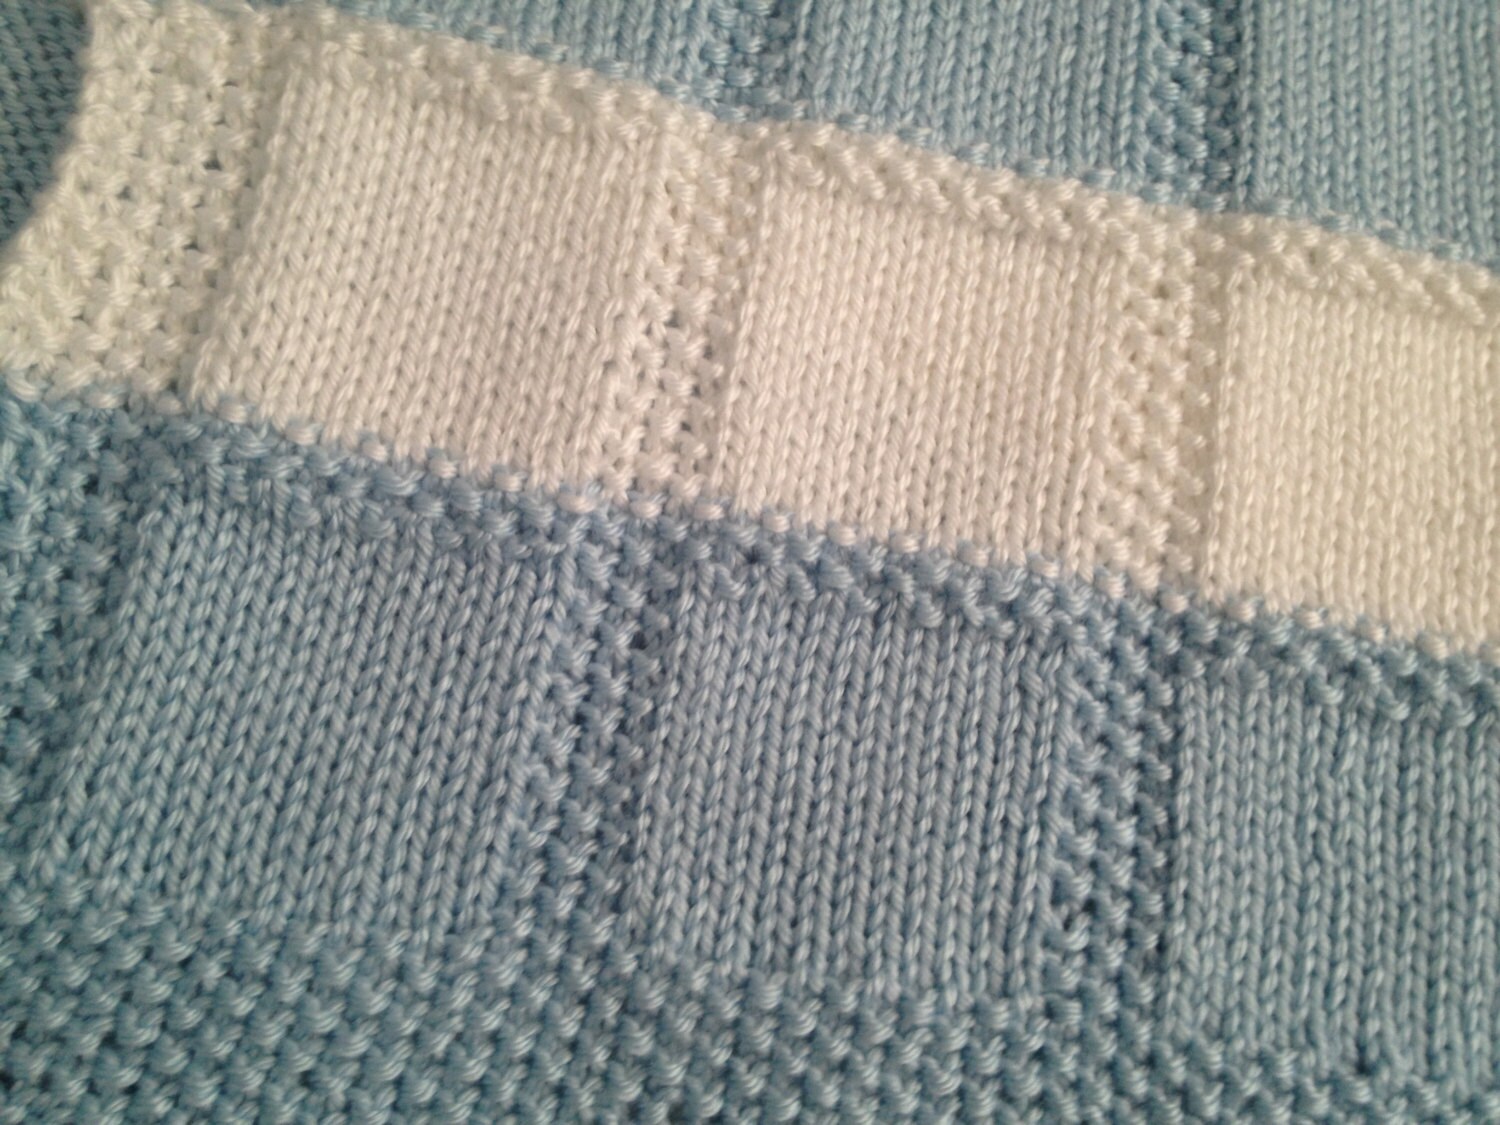 hand knit blanket instructions